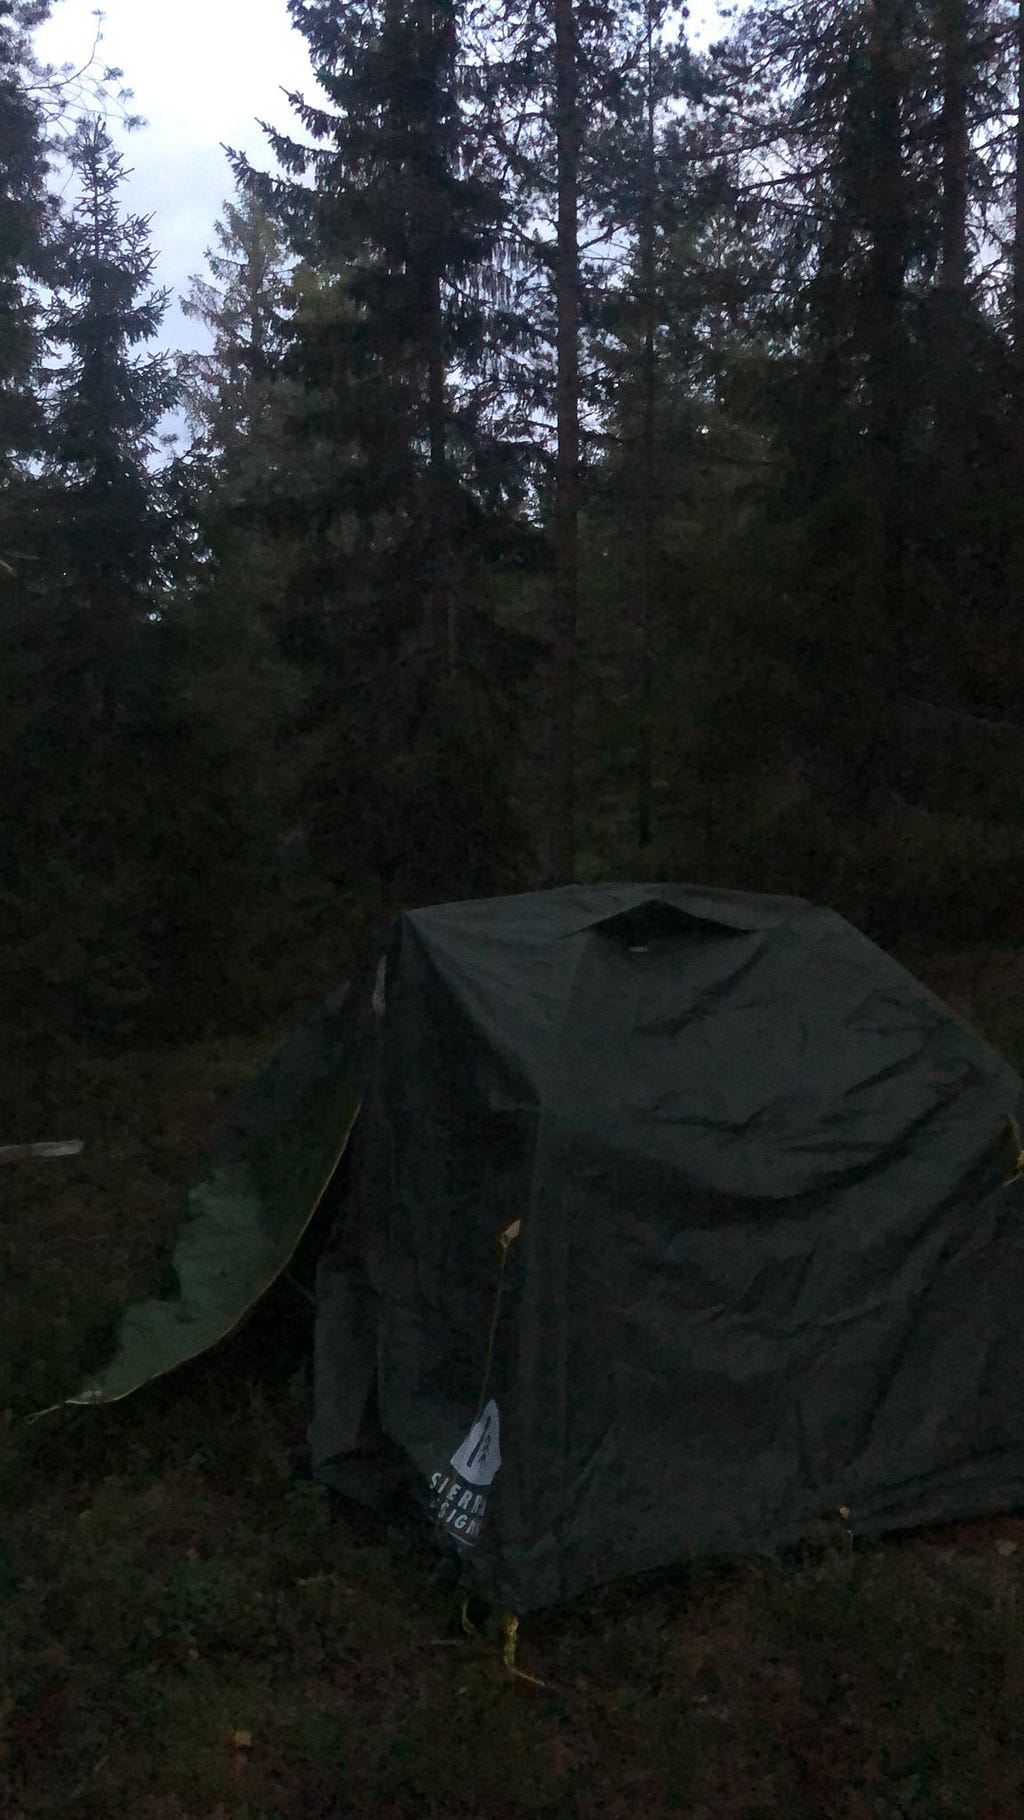 A tent in the dark woods of Norway